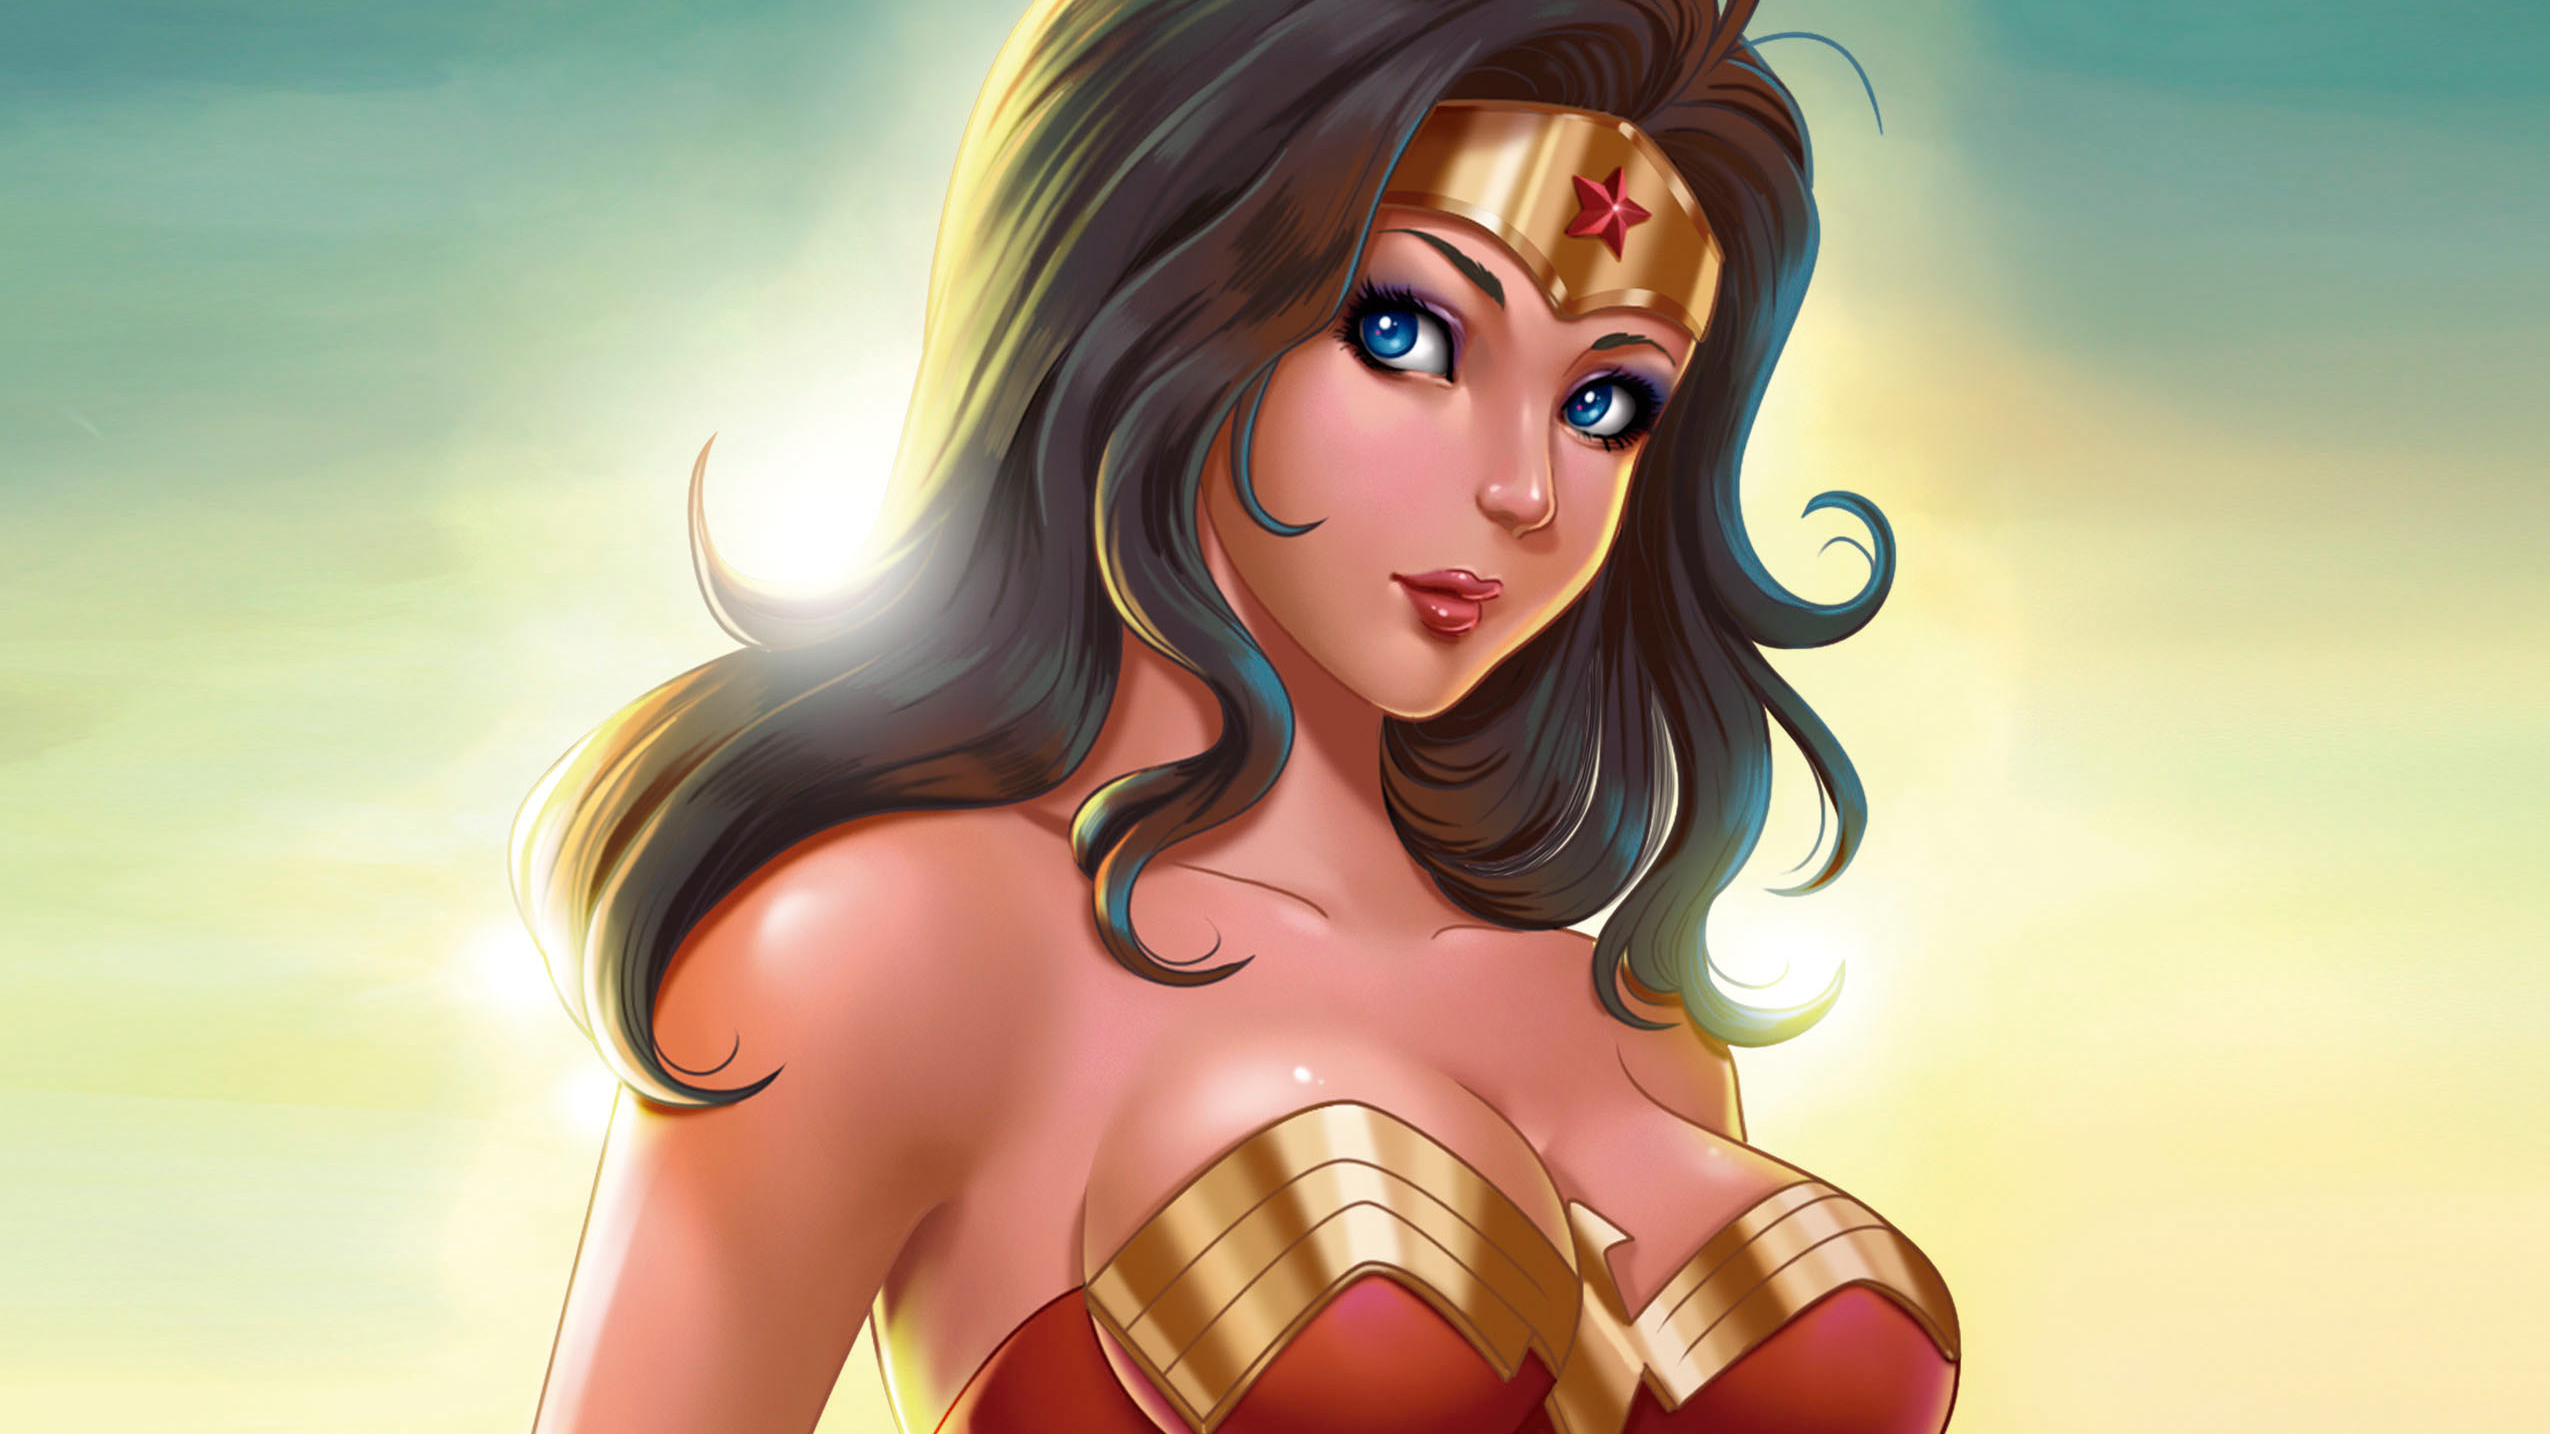 Cute art wonder woman hd superheroes k wallpapers images backgrounds photos and pictures